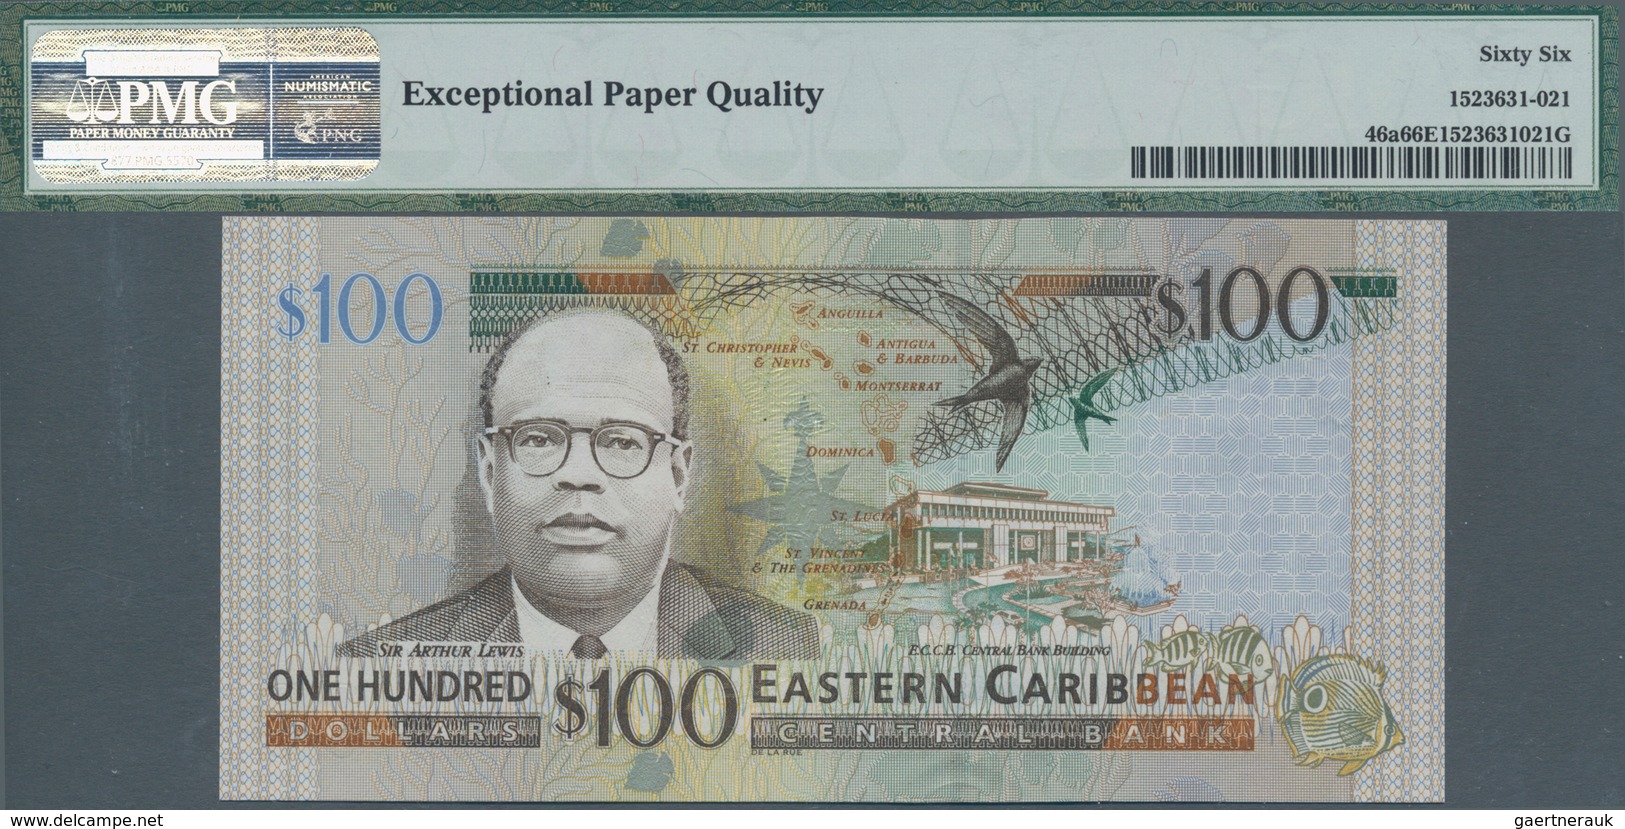 Antigua: Nice group of 4 banknotes 100 Dollars ND(2003), P.46a, all in UNC and all PMG graded 66 Gem